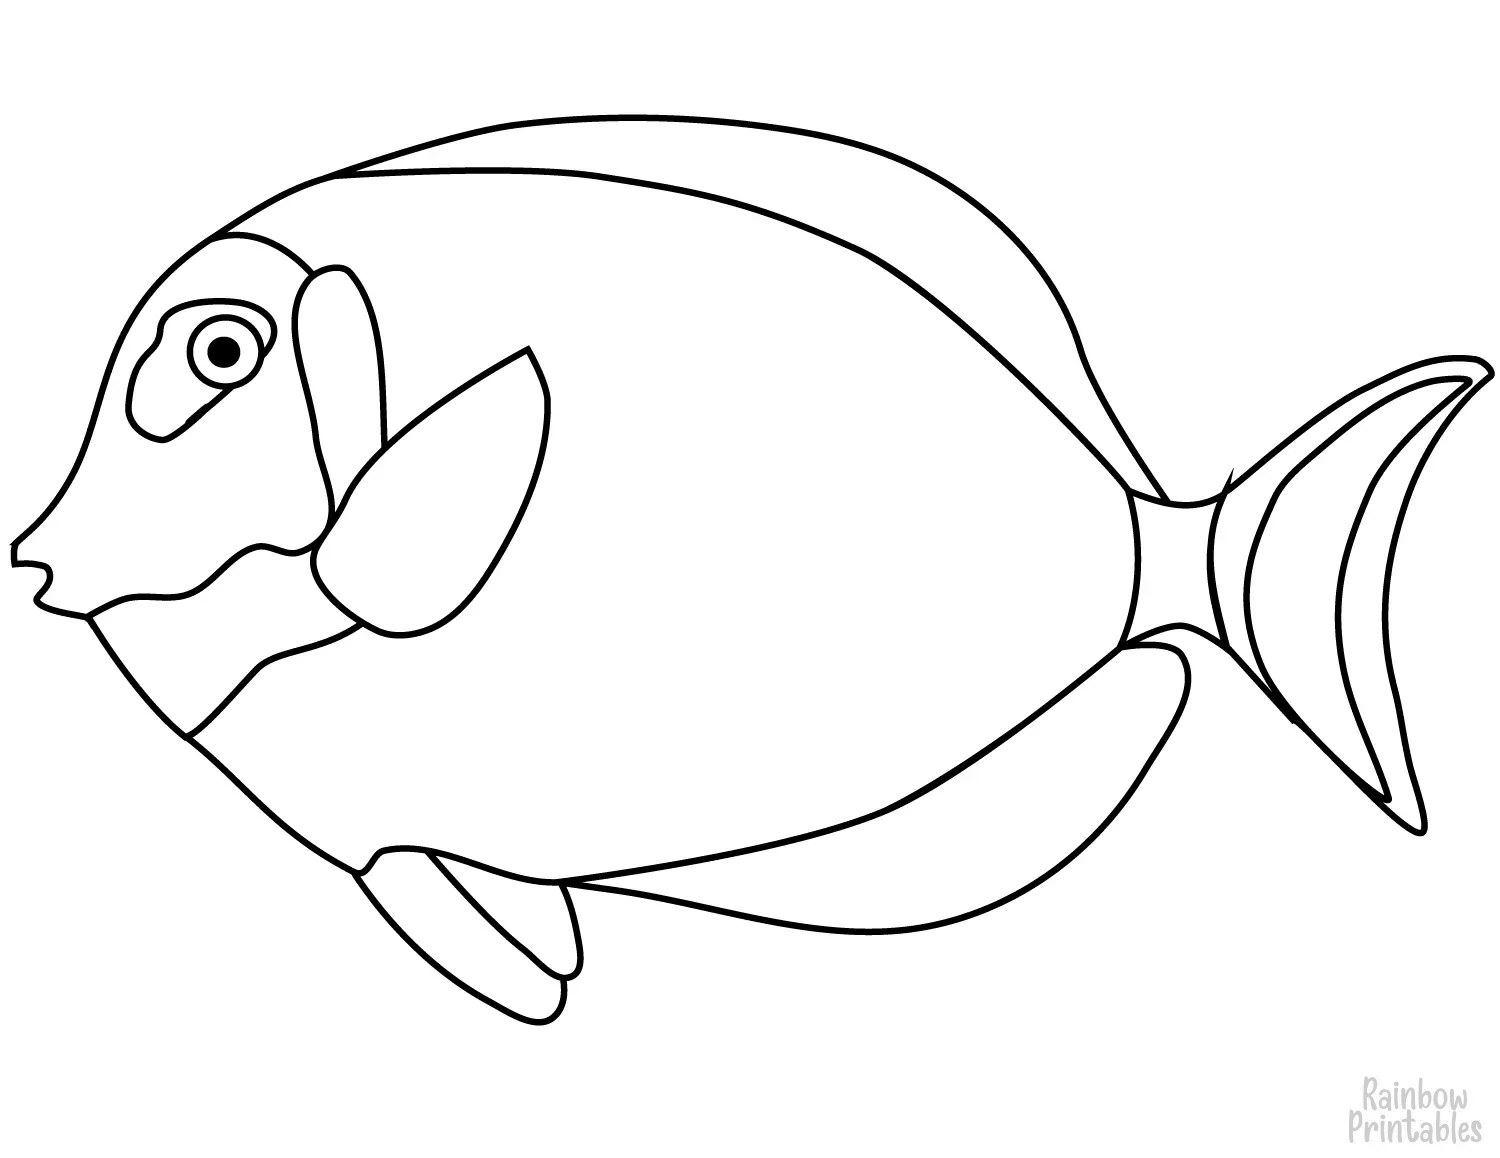 SIMPLE-EASY-line-drawings-tang-fish-coloring-page-for-kids